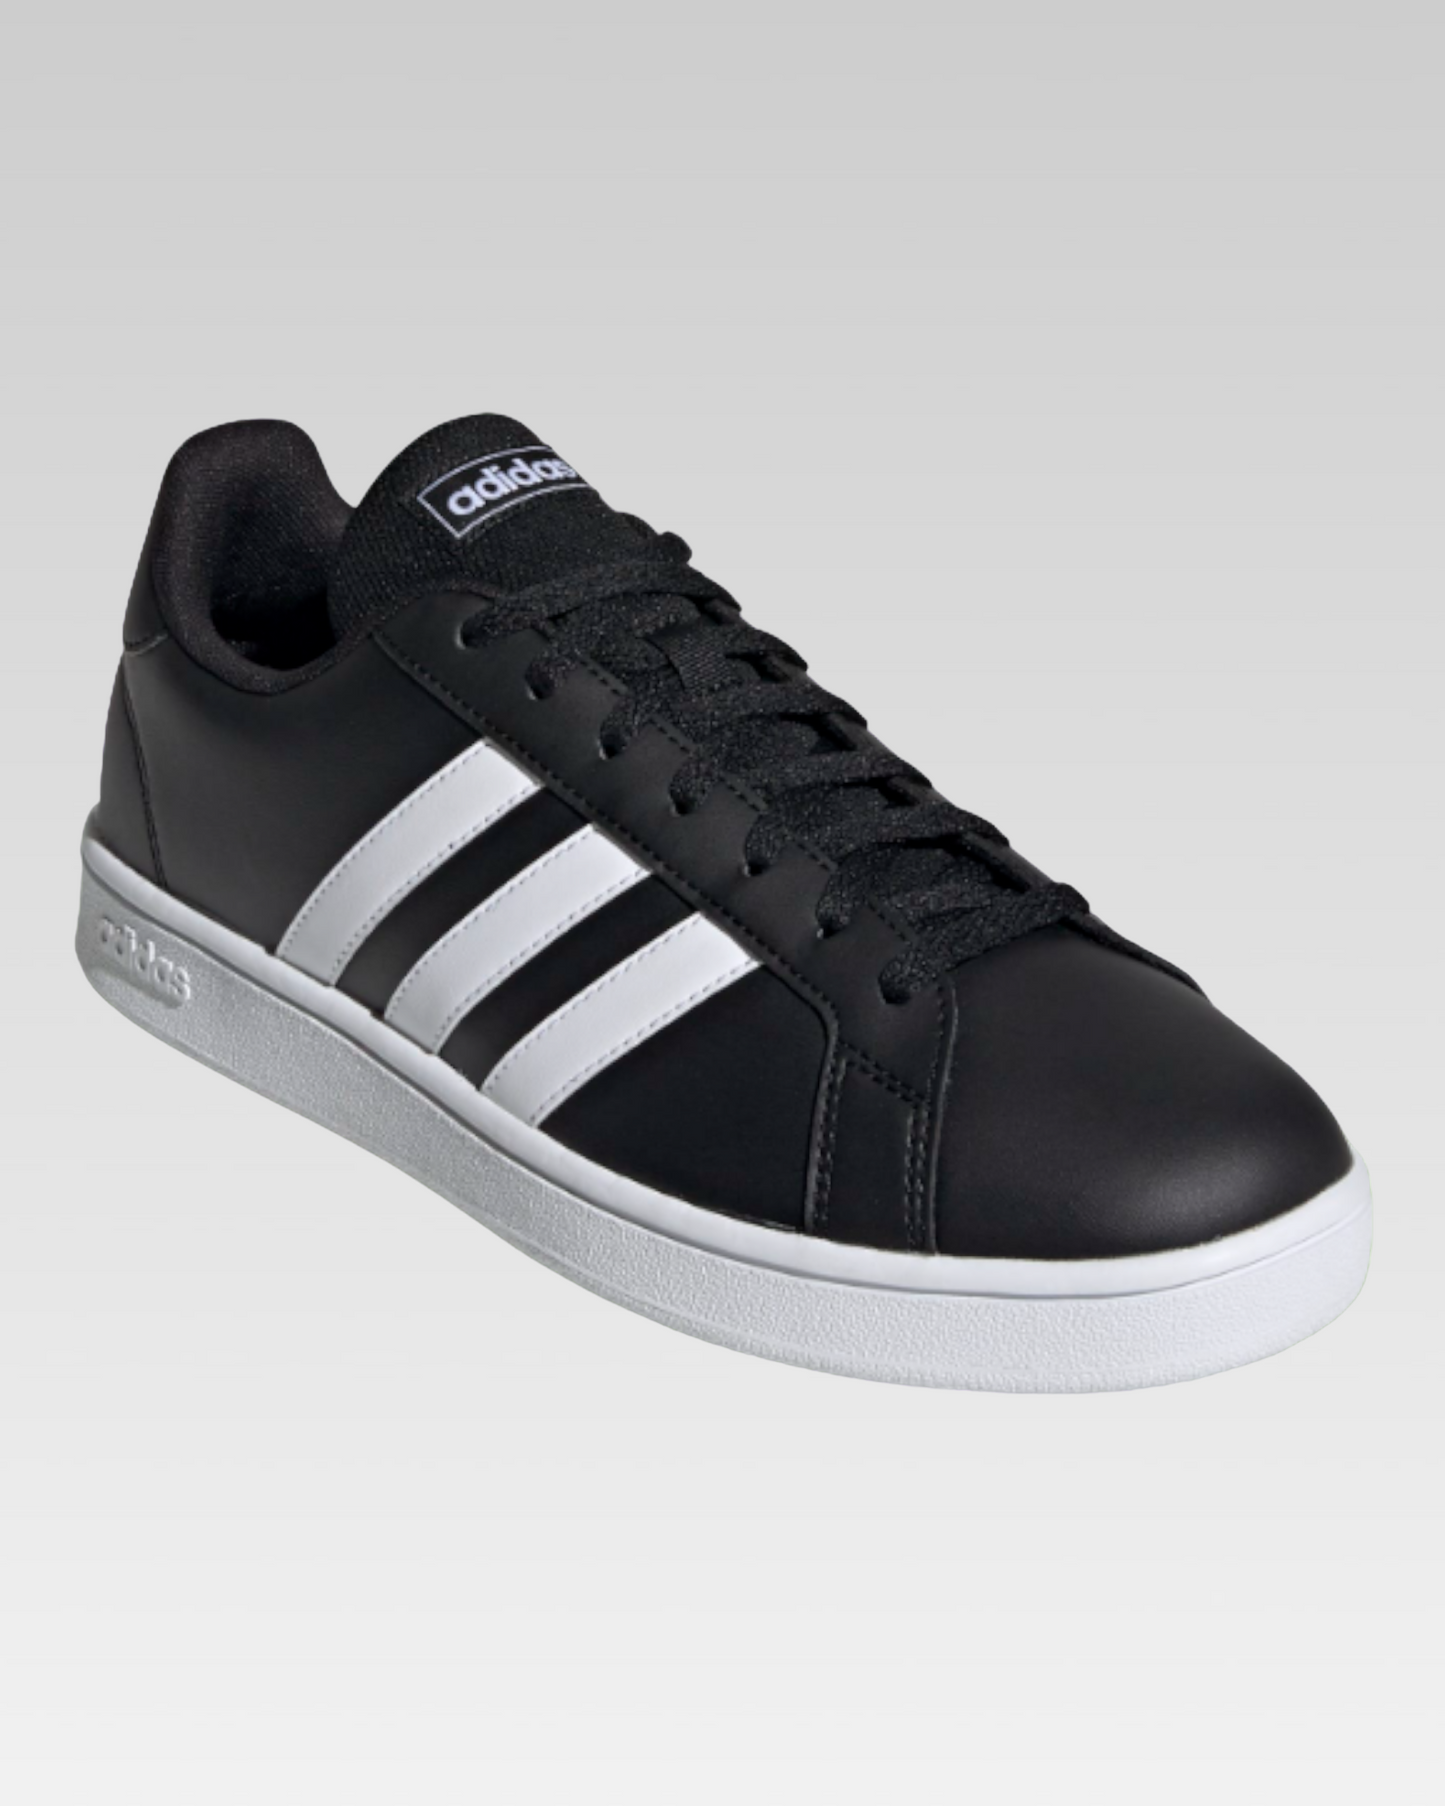 TENIS ADIDAS GRAND COURT BASE EE7900 HOMBRE Y MUJER